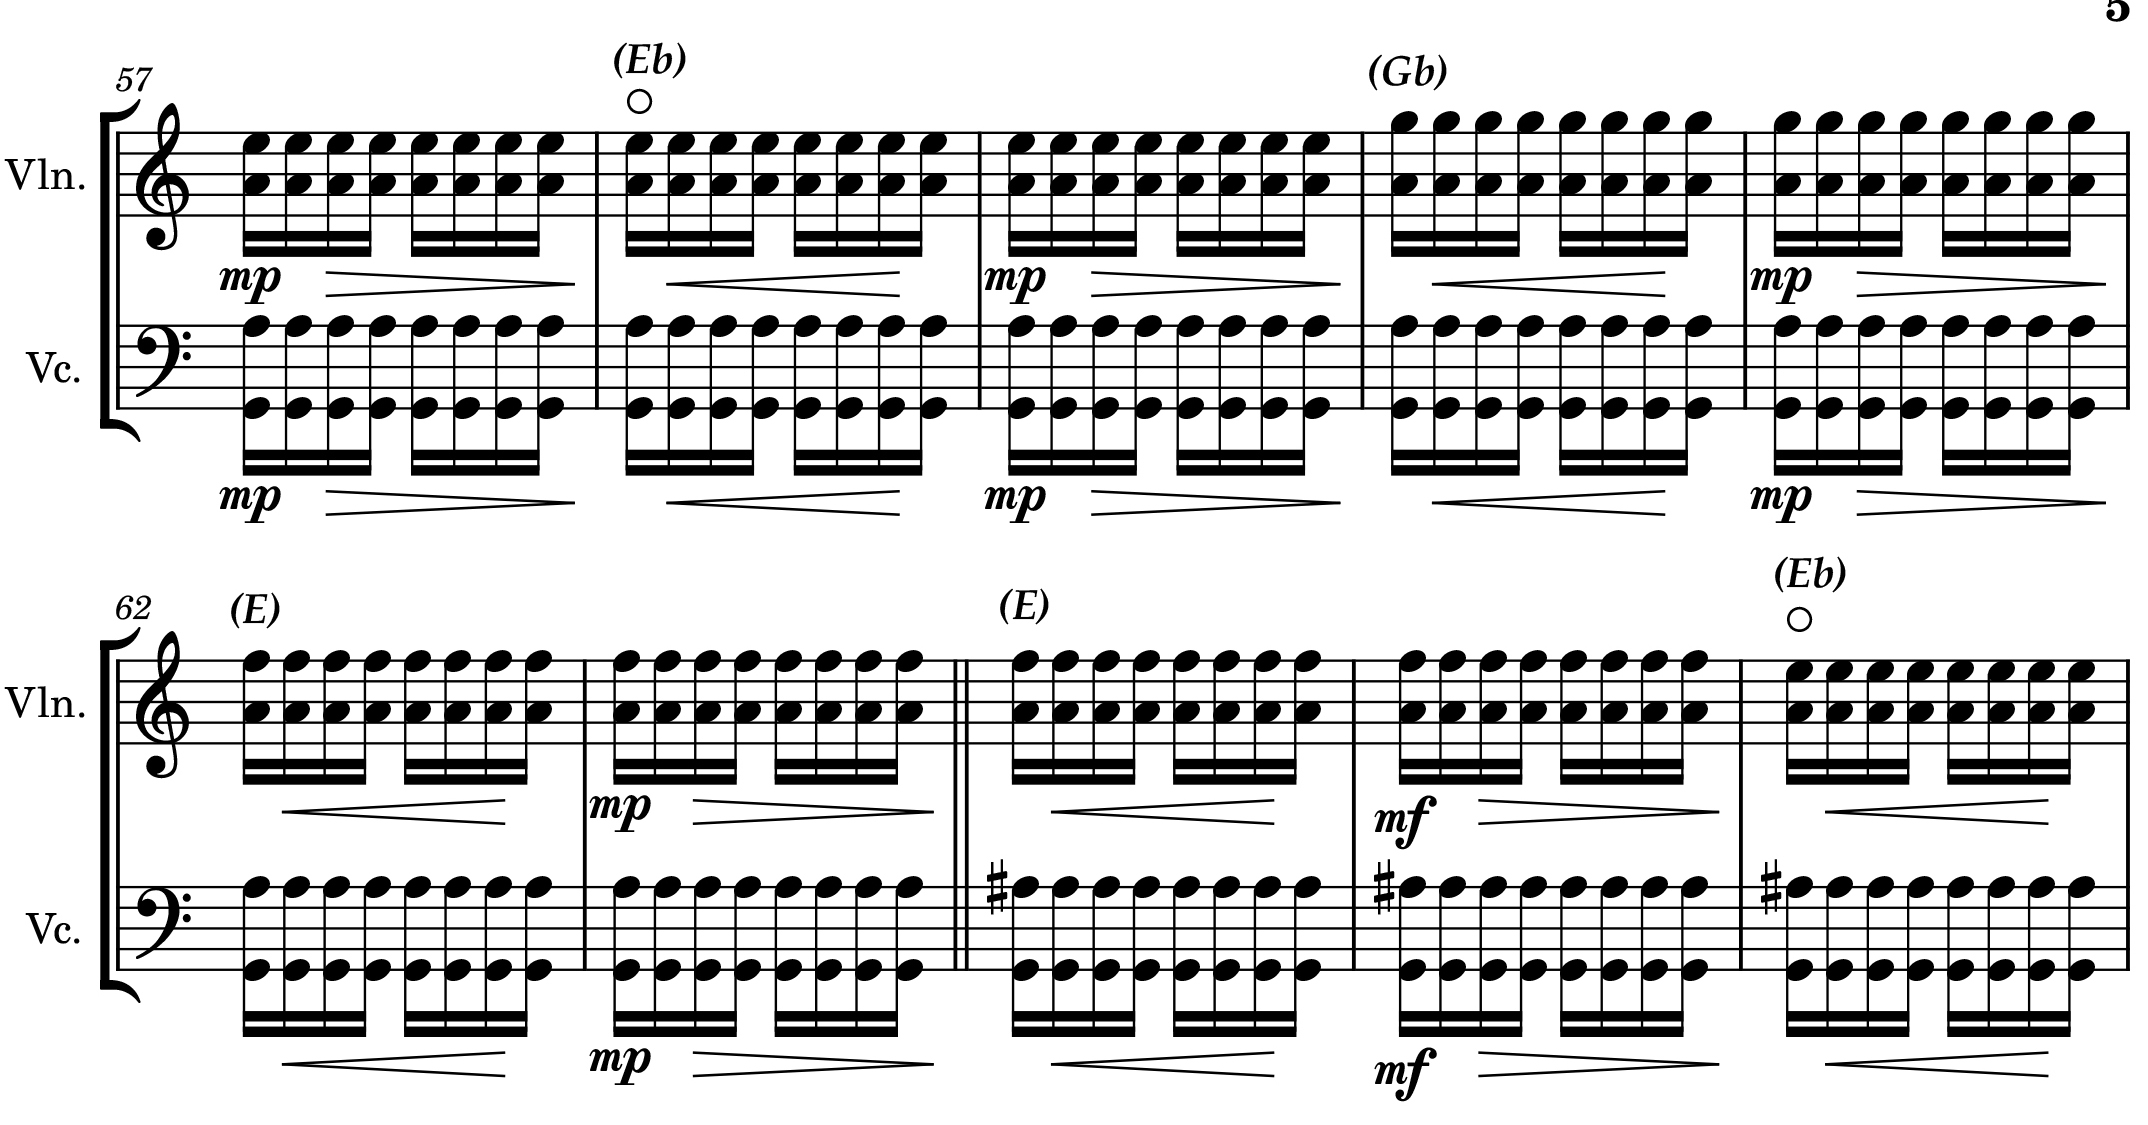 An excerpt from the score for Shi-An Costello's Diminishing 5ths, a composition for violin and violoncello duo